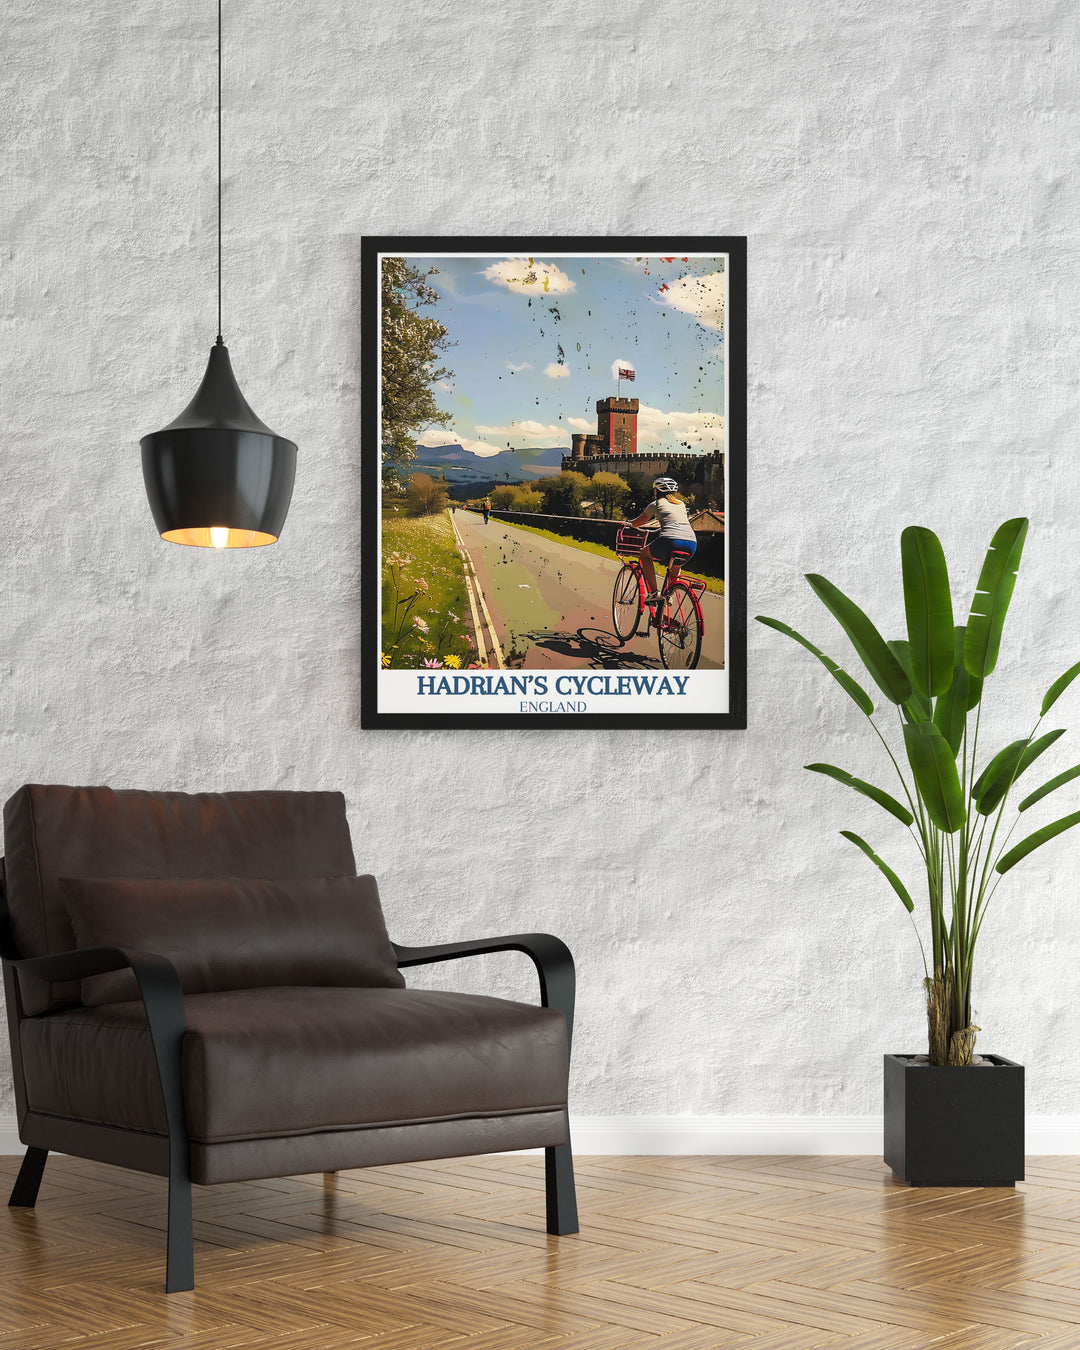 The travel poster of Hadrians Cycleway captures the scenic route along Hadrians Wall, showcasing the historical and natural beauty of Northern England, perfect for adding adventure to your home decor.